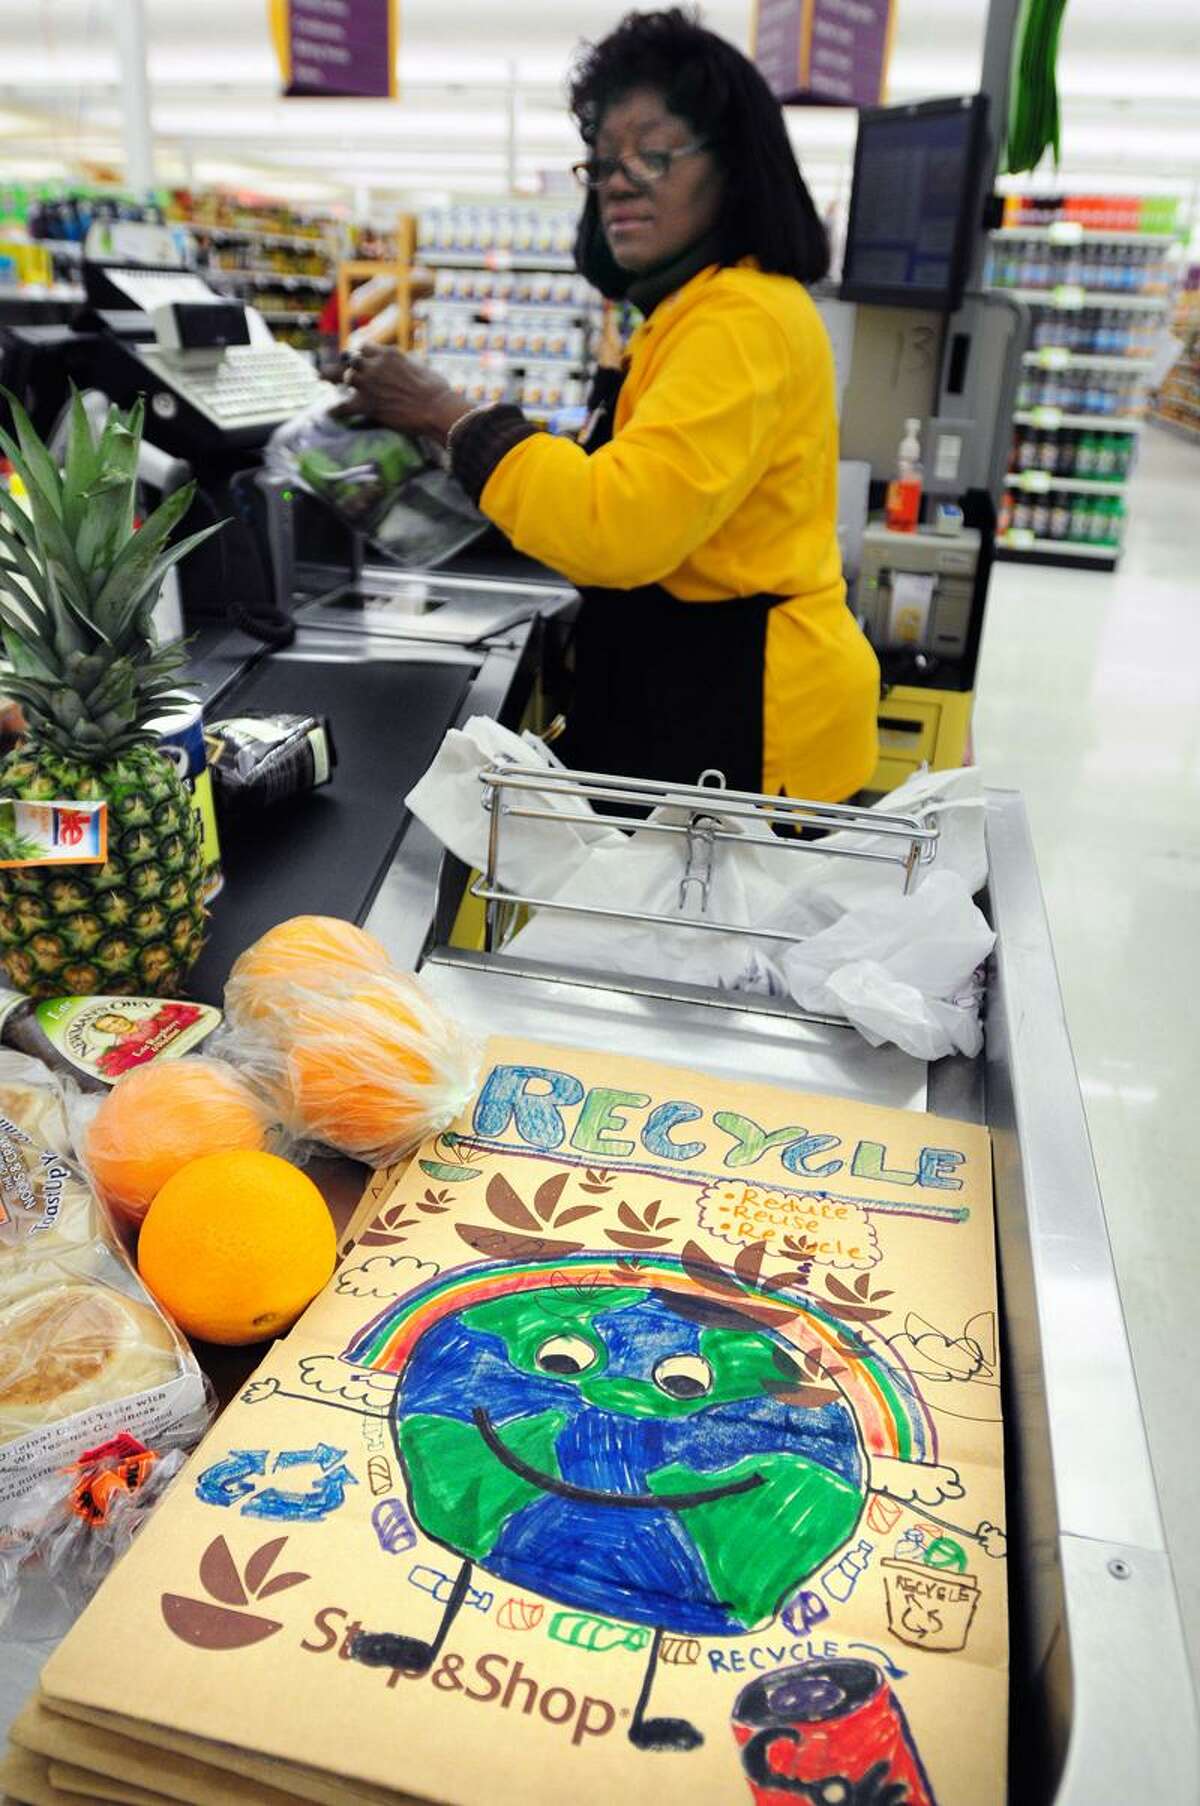 Cashier Valerie Ingram scans items at the Super Stop & Shop in Hamden on 4/12/2013. The stack of bags in the foreground were decorated by Hamden students to promote the Hamden Earth Day Celebration at Hamden Middle School on April 20th.Photo by Arnold Gold/New Haven Register AG0492C